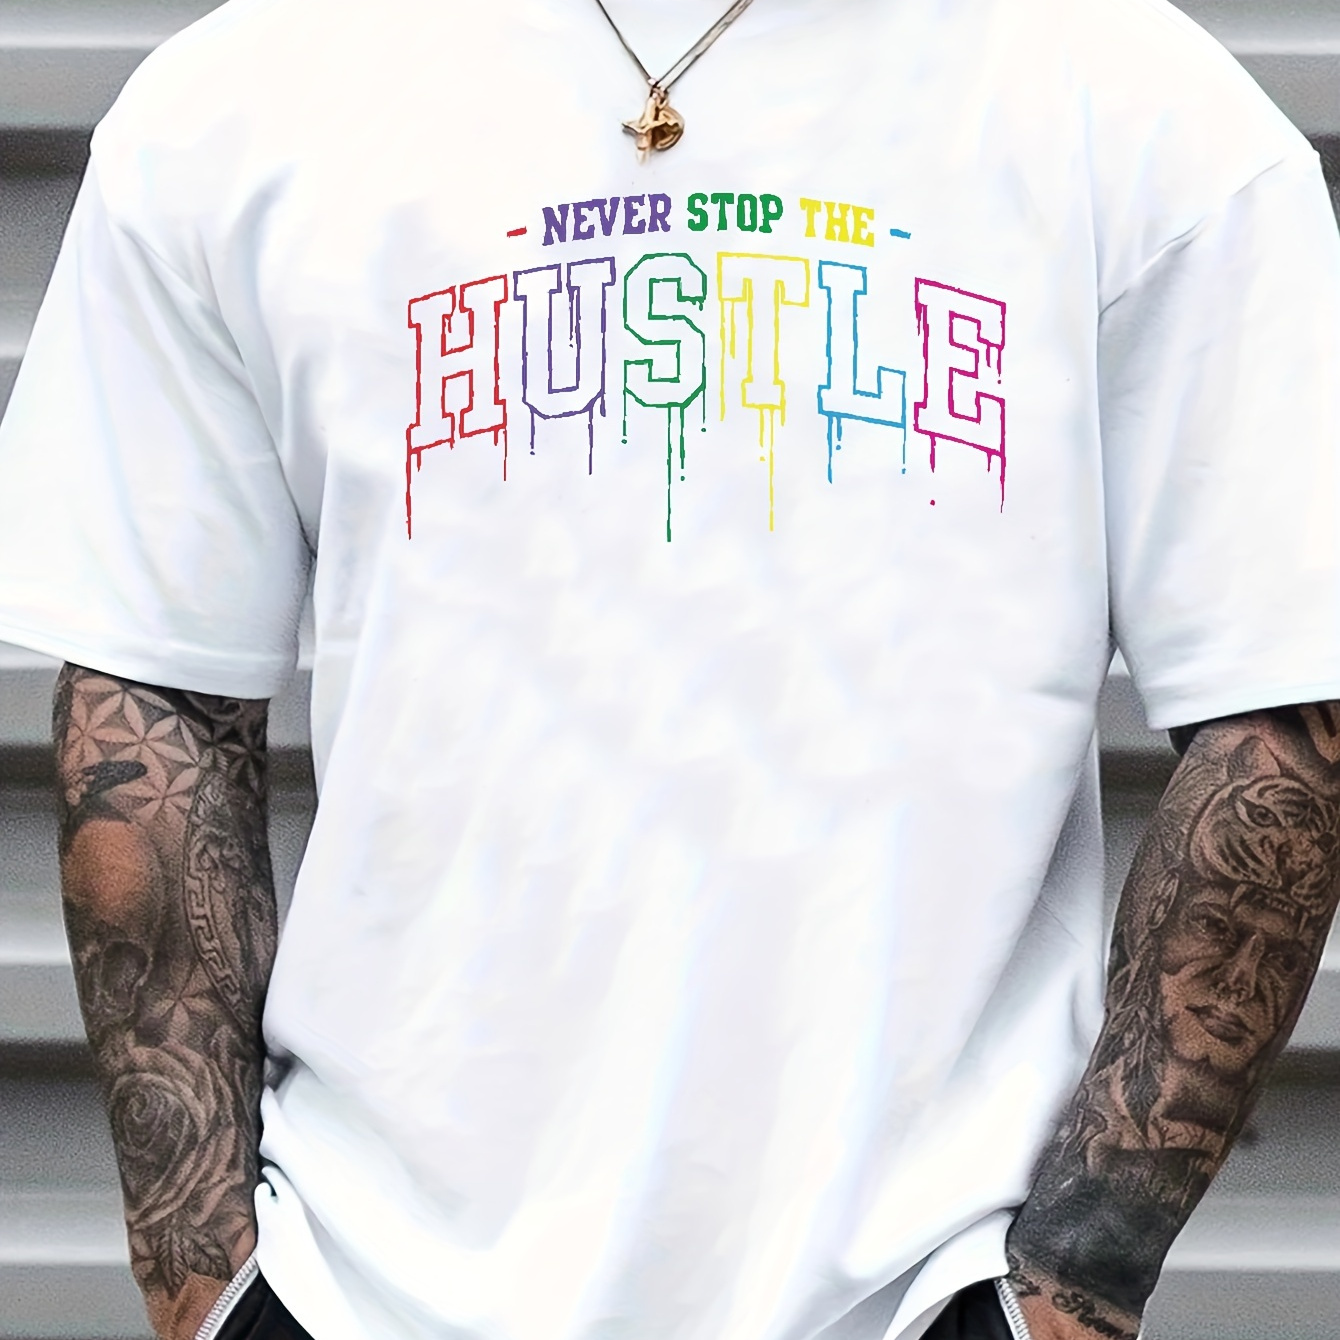 

Hustle Print, Men's Graphic Design Crew Neck Niche T-shirt, Casual Comfy Tees Tshirts For Summer, Men's Clothing Tops For Daily Vacation Resorts